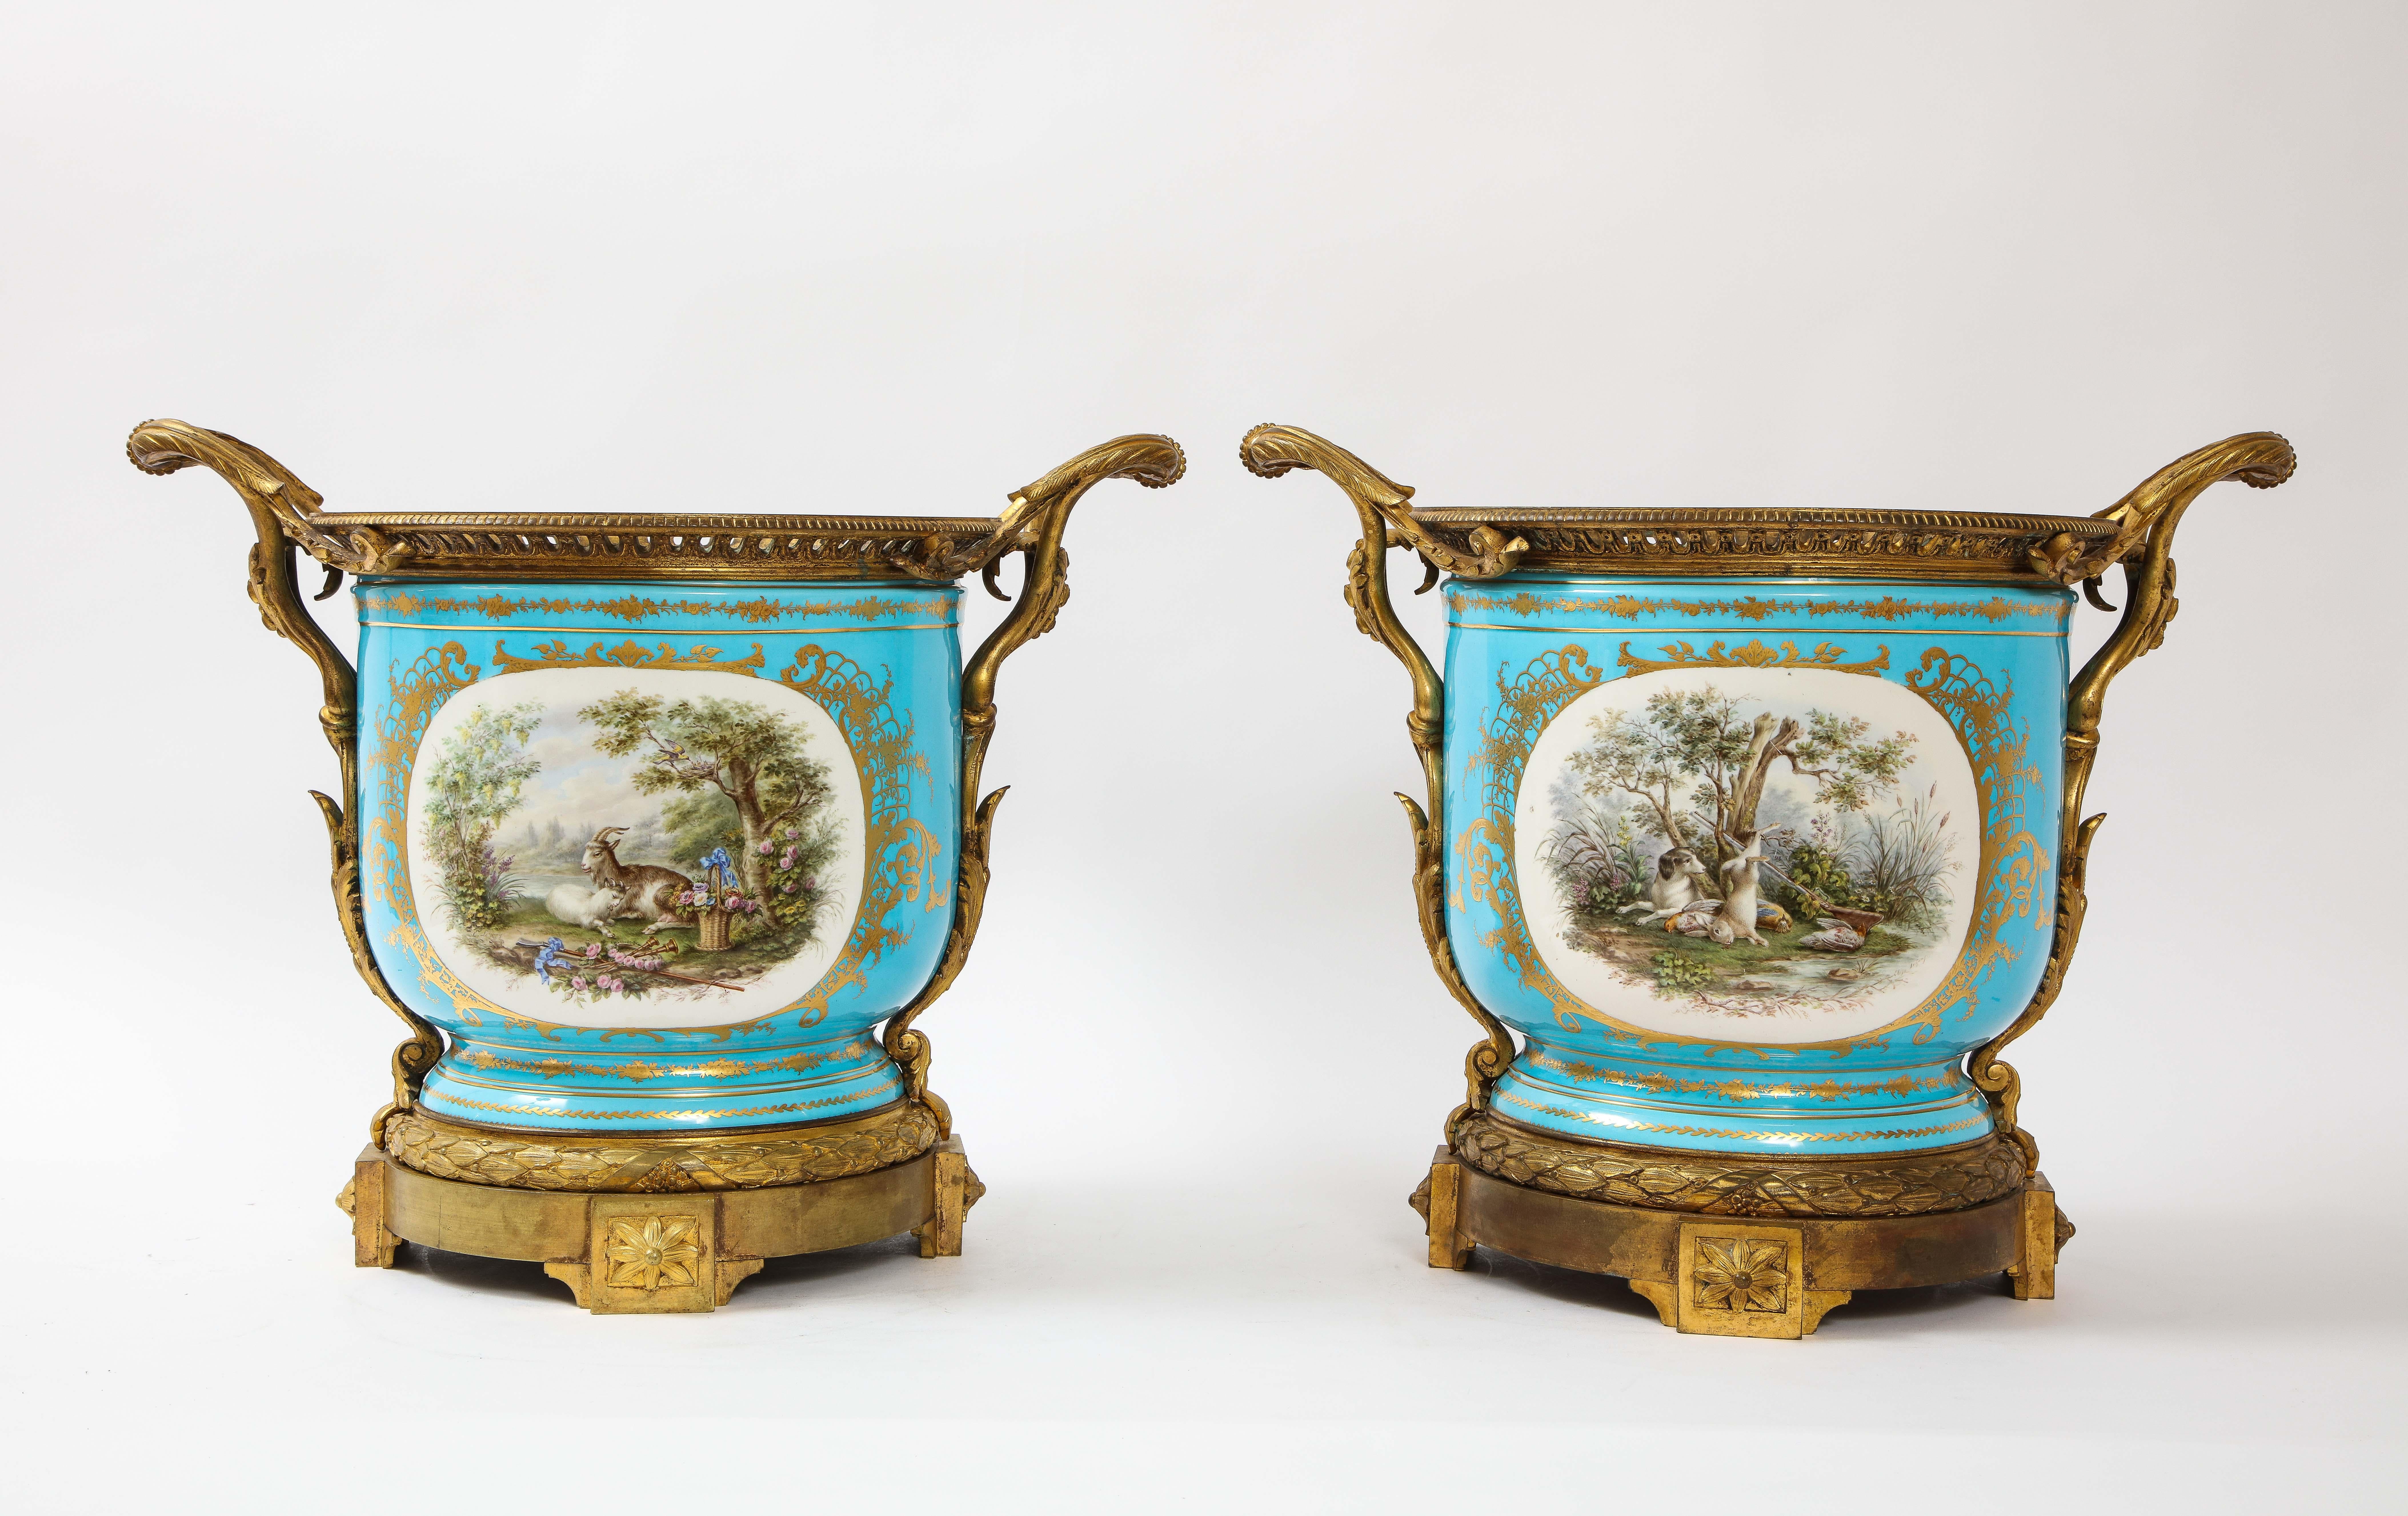 A monumental and rare pair of 19th century French dore bronze mounted Sèvres Celeste blue porcelain cachepots. These cache pots are extremely rare to find in this monumental size. Each is hand painted in a celest blue ground with two sides of